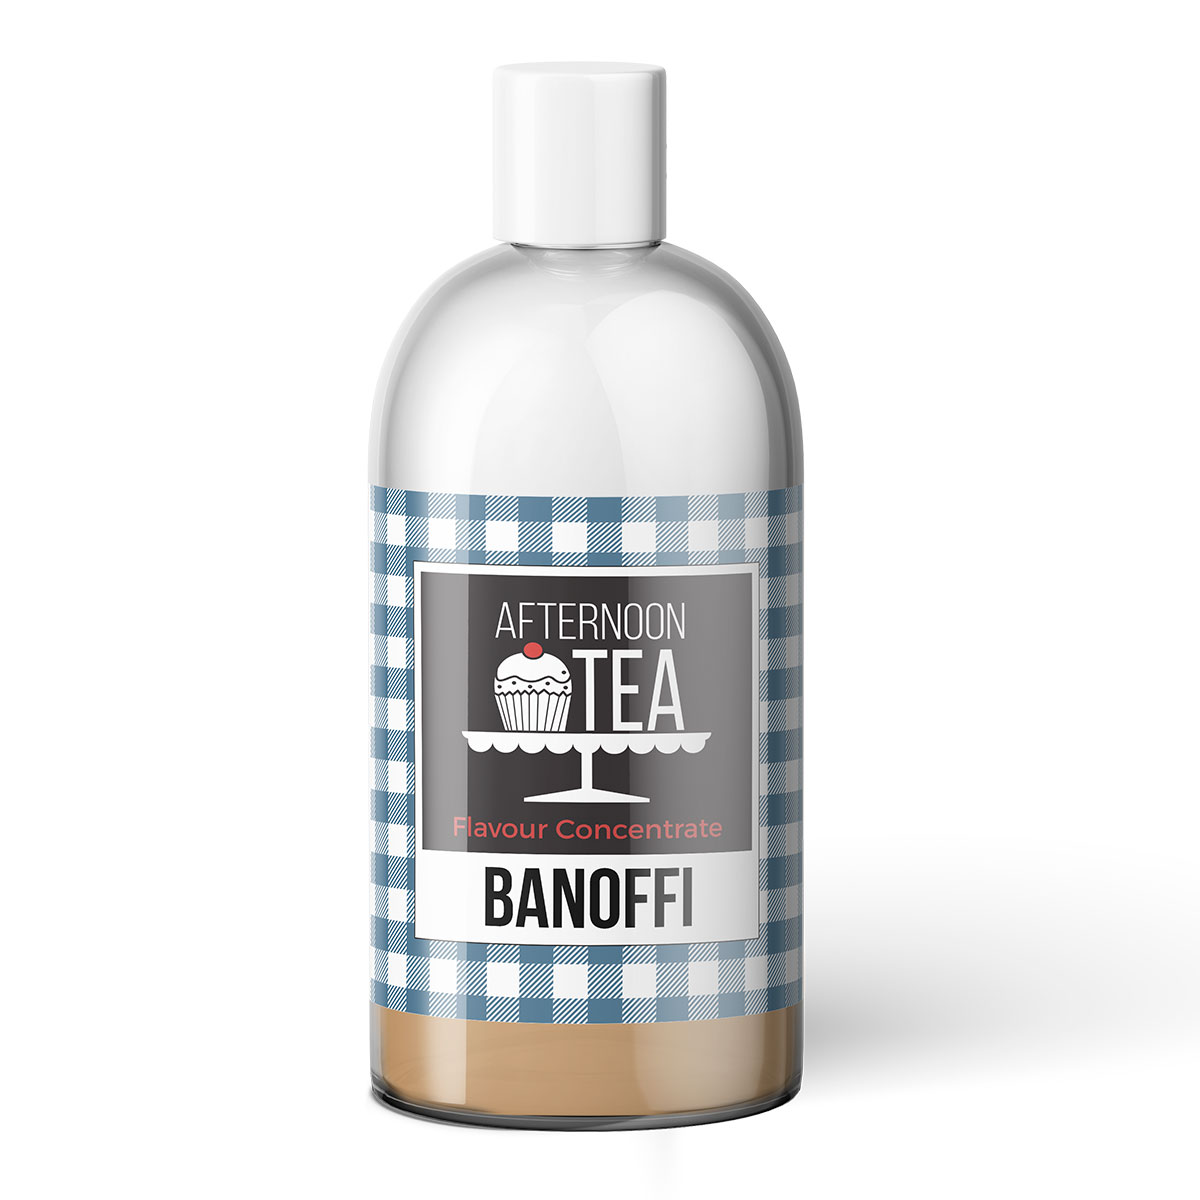 Banoffi Flavour Shot by Afternoon Tea - 250ml